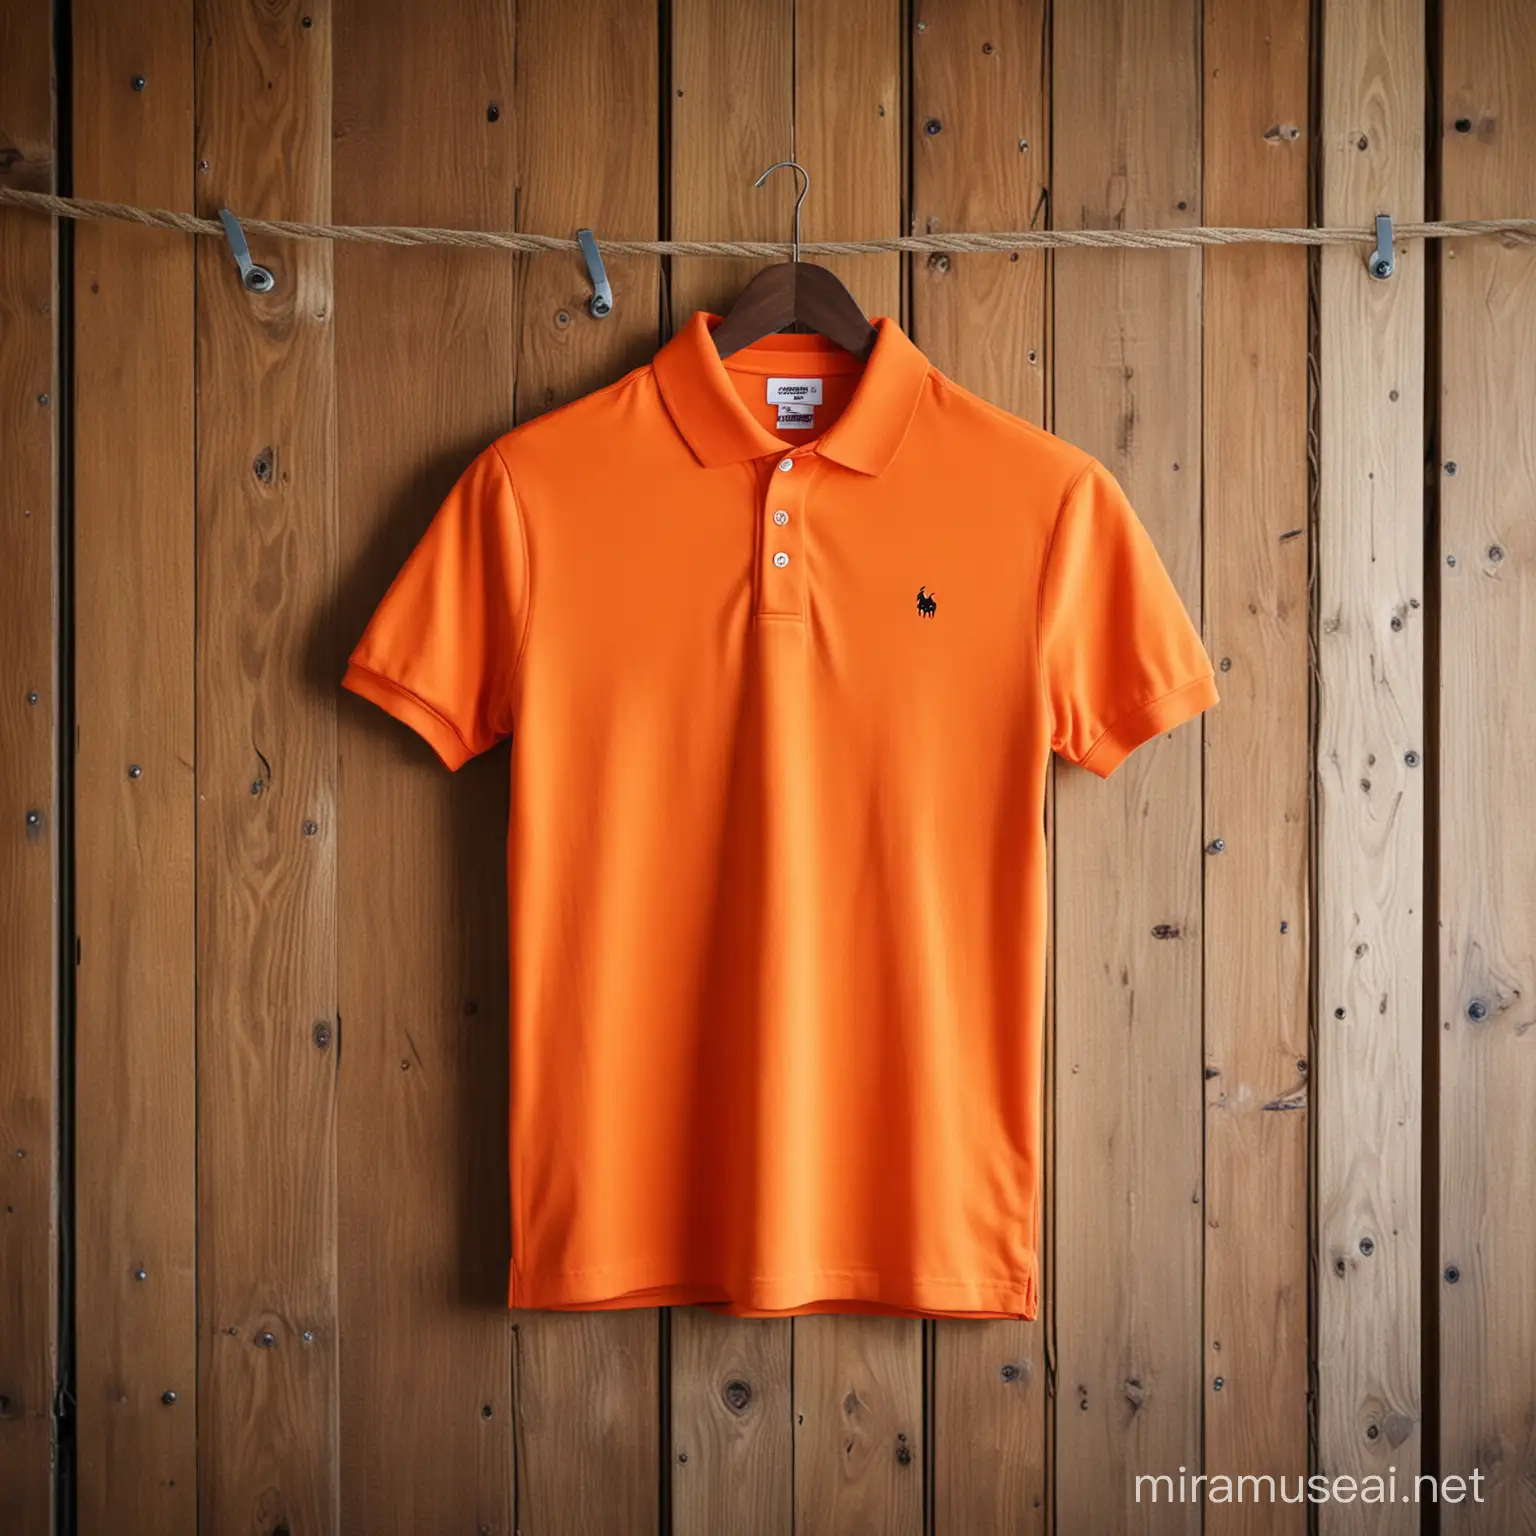 Orange Polo Shirt Displayed on Rustic Wooden Wall